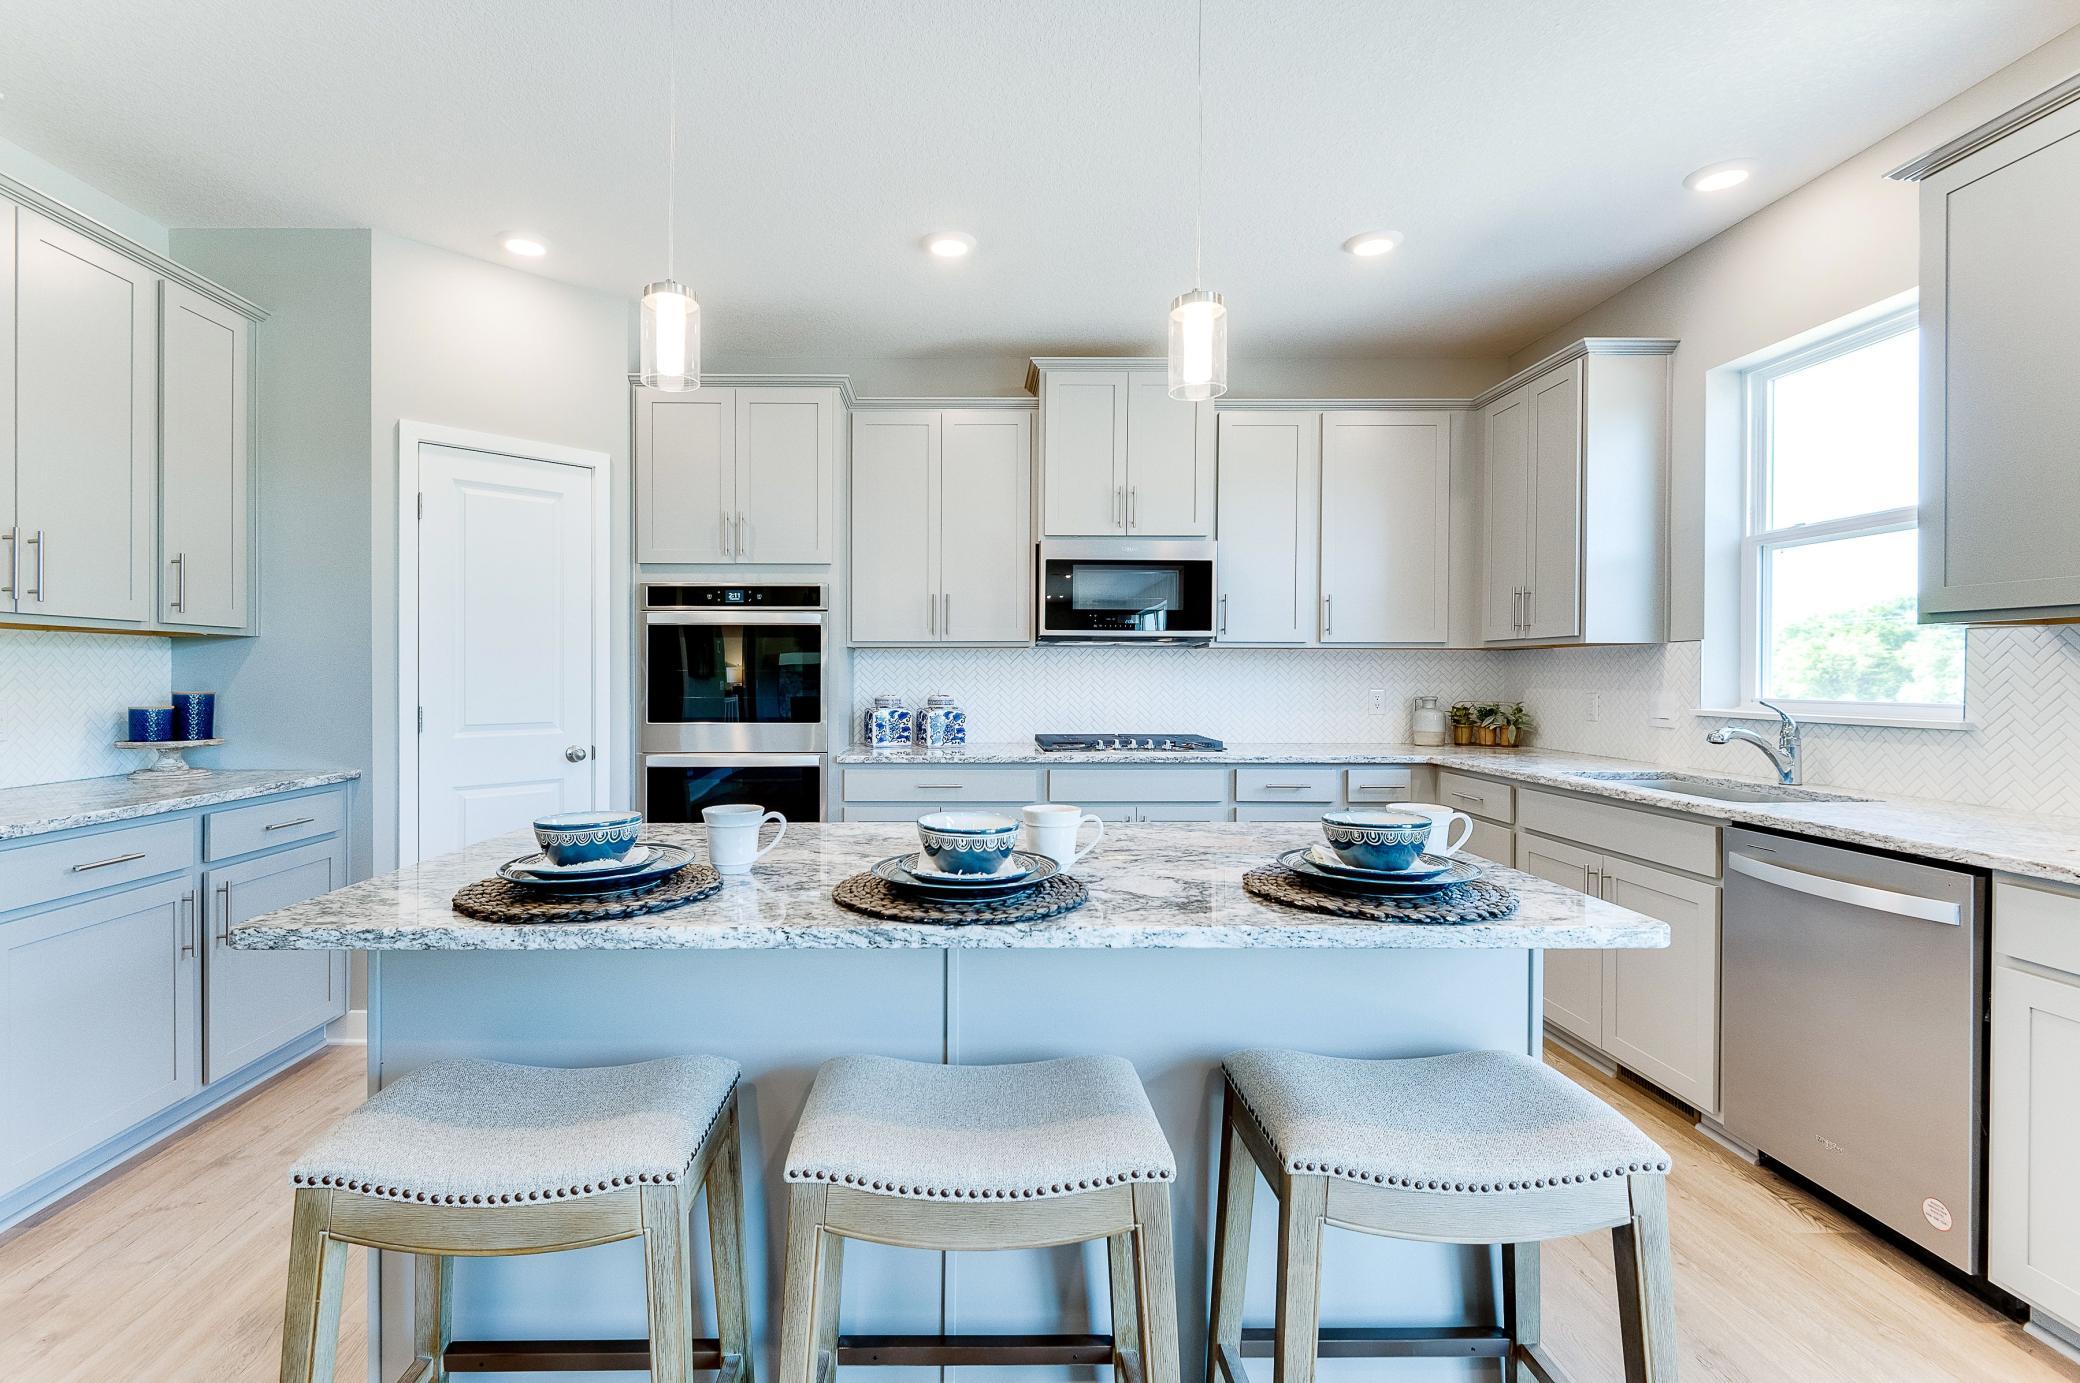 A kitchen that is equal parts open and inviting throughout, the space will be the focal point of gatherings for years to come! Photo of model home, color and options will vary.